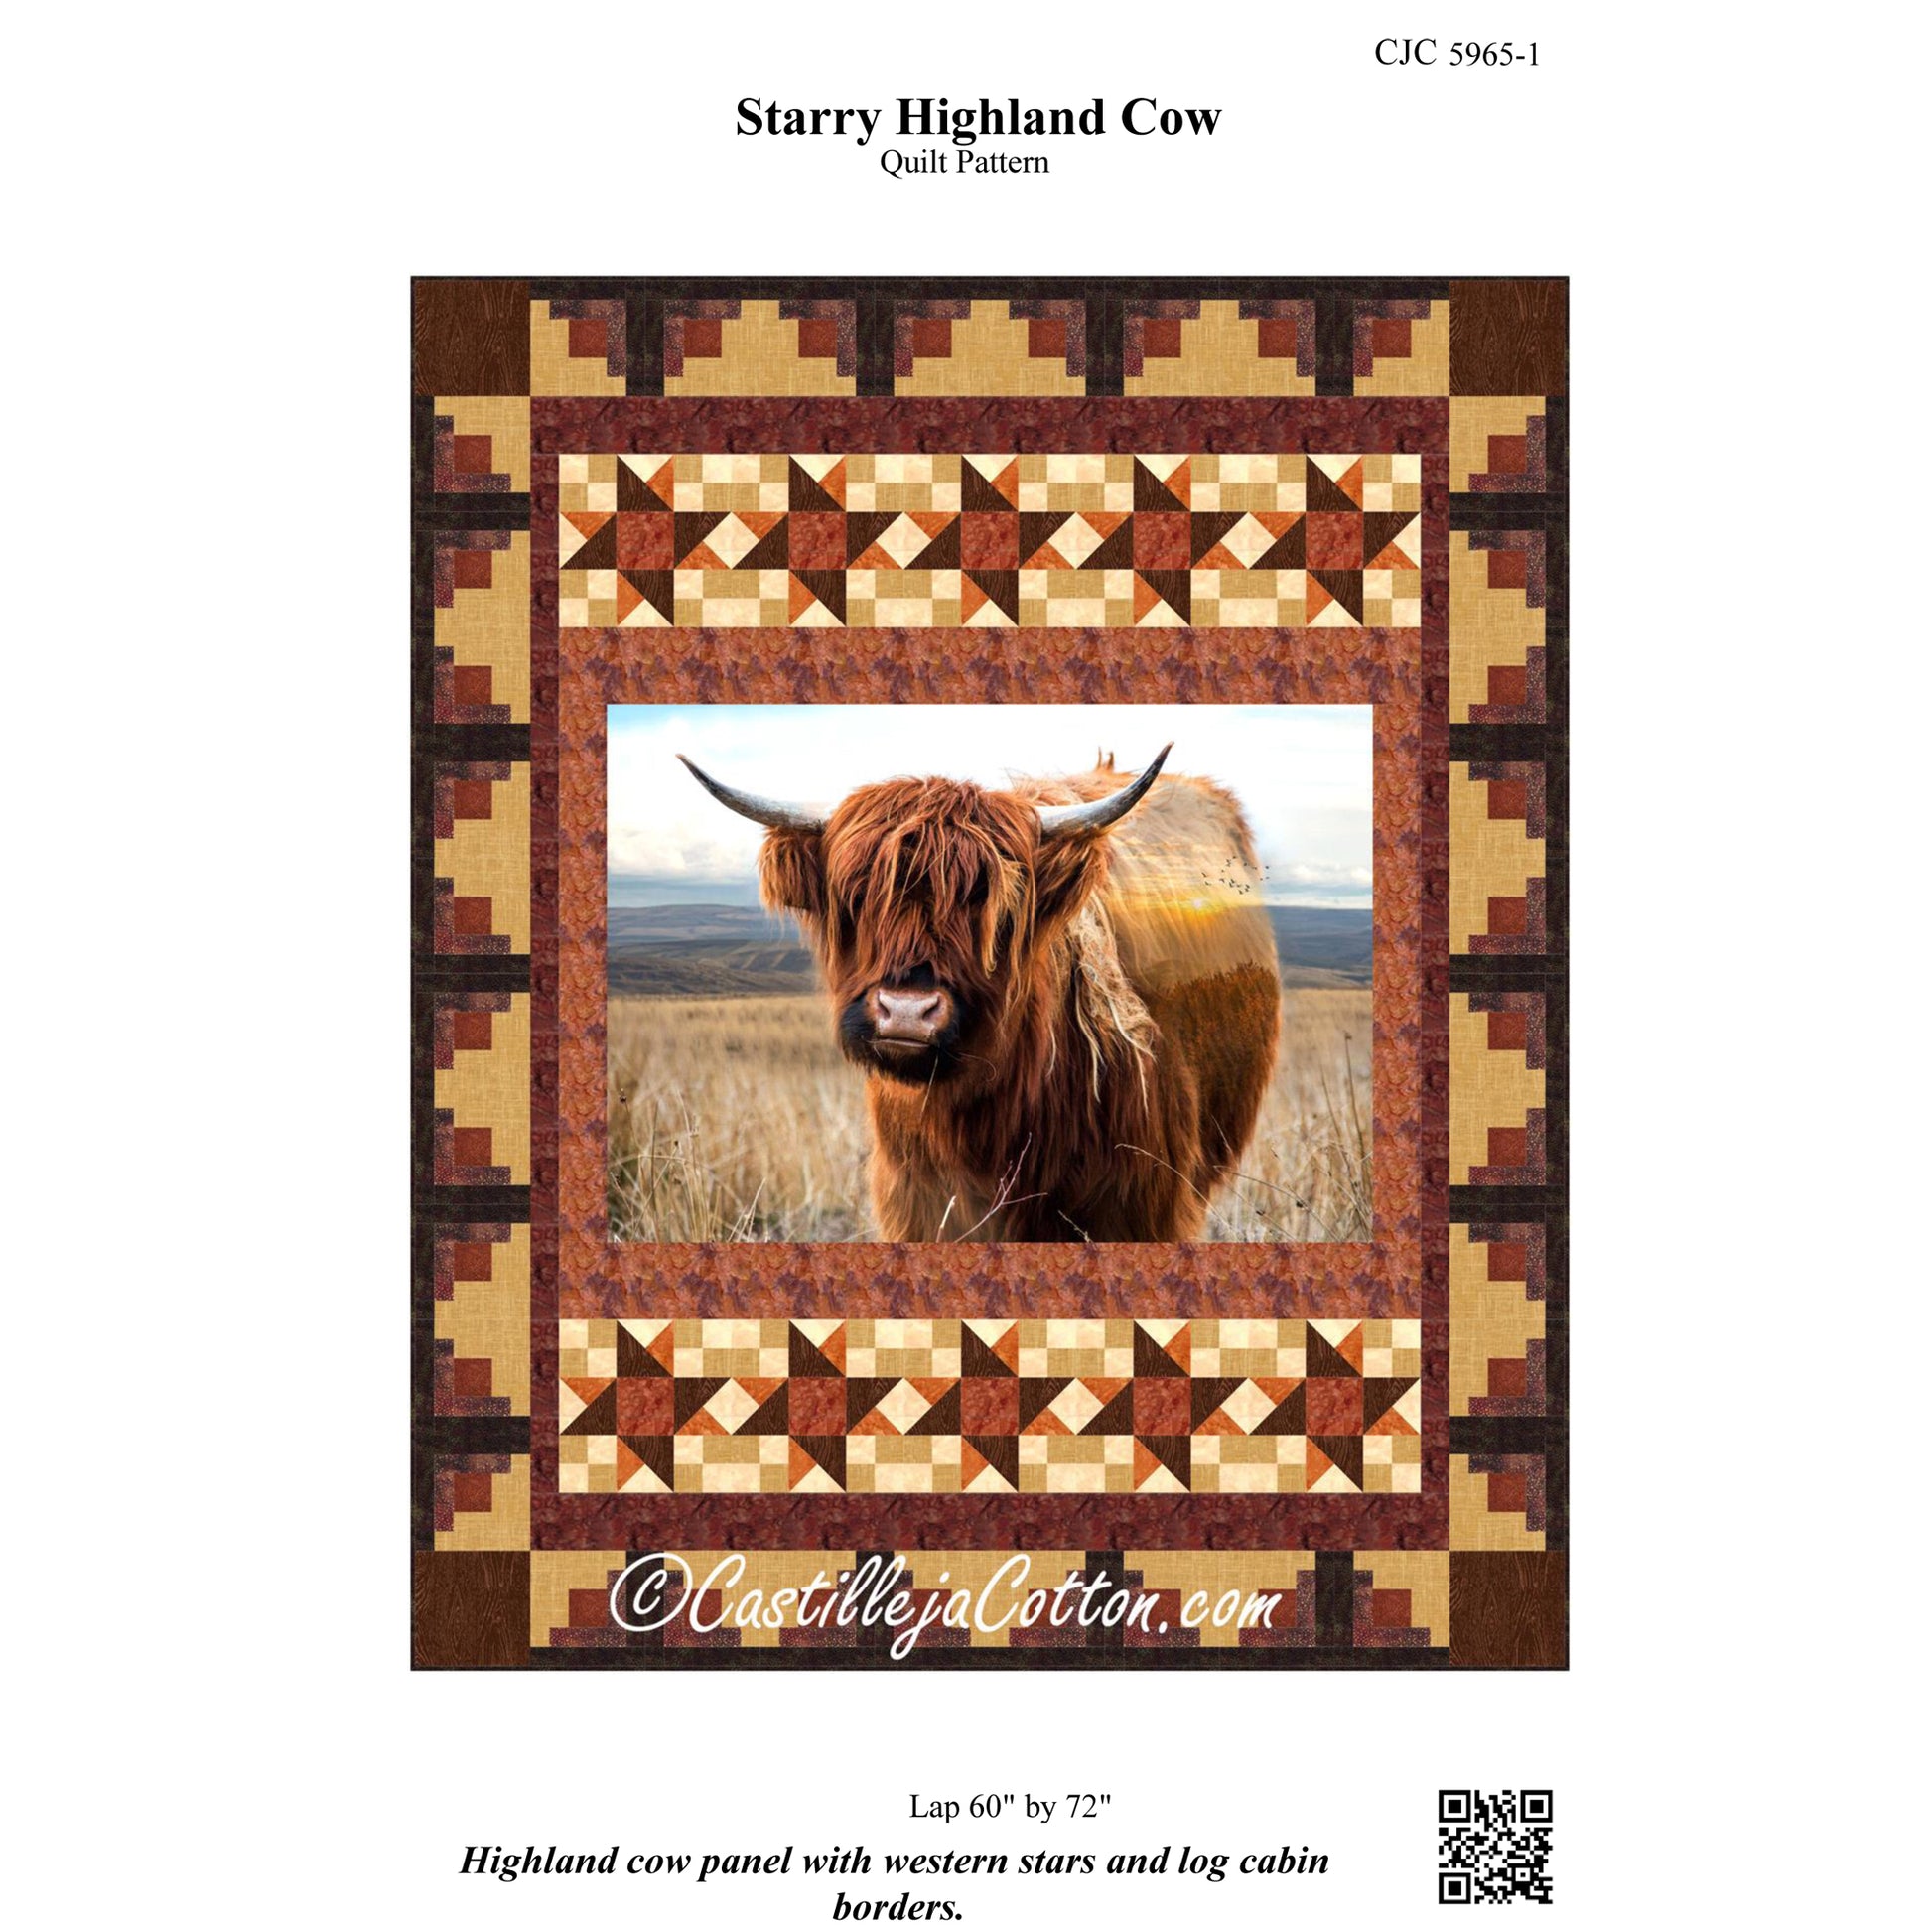 Cover image of pattern for Starry Highland Cow.